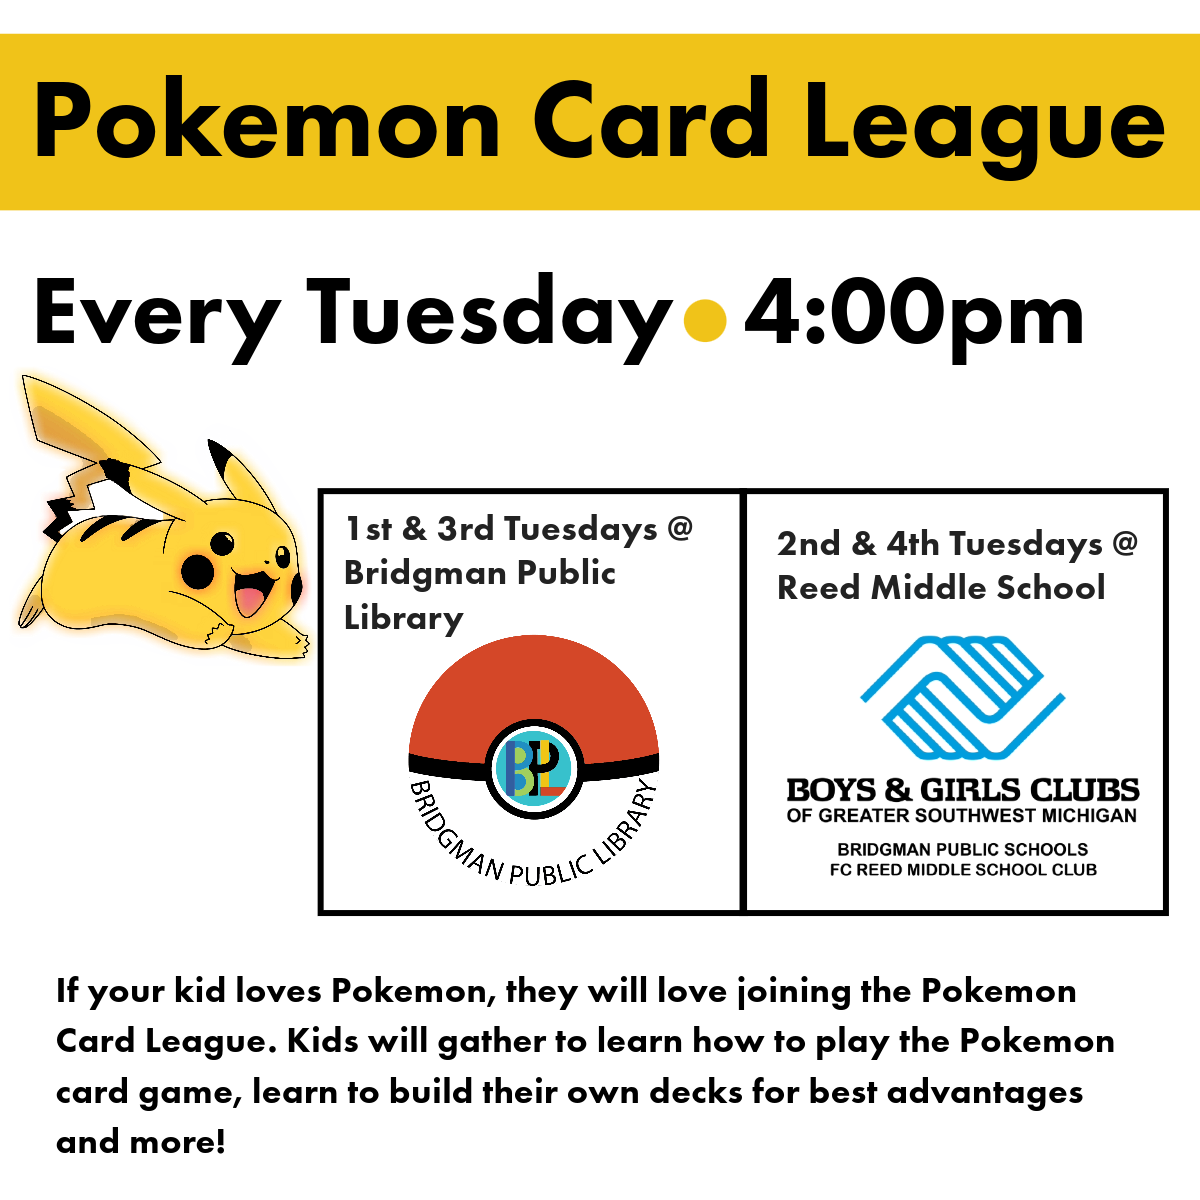 Pokemon card league every Tuesday at 4:00.